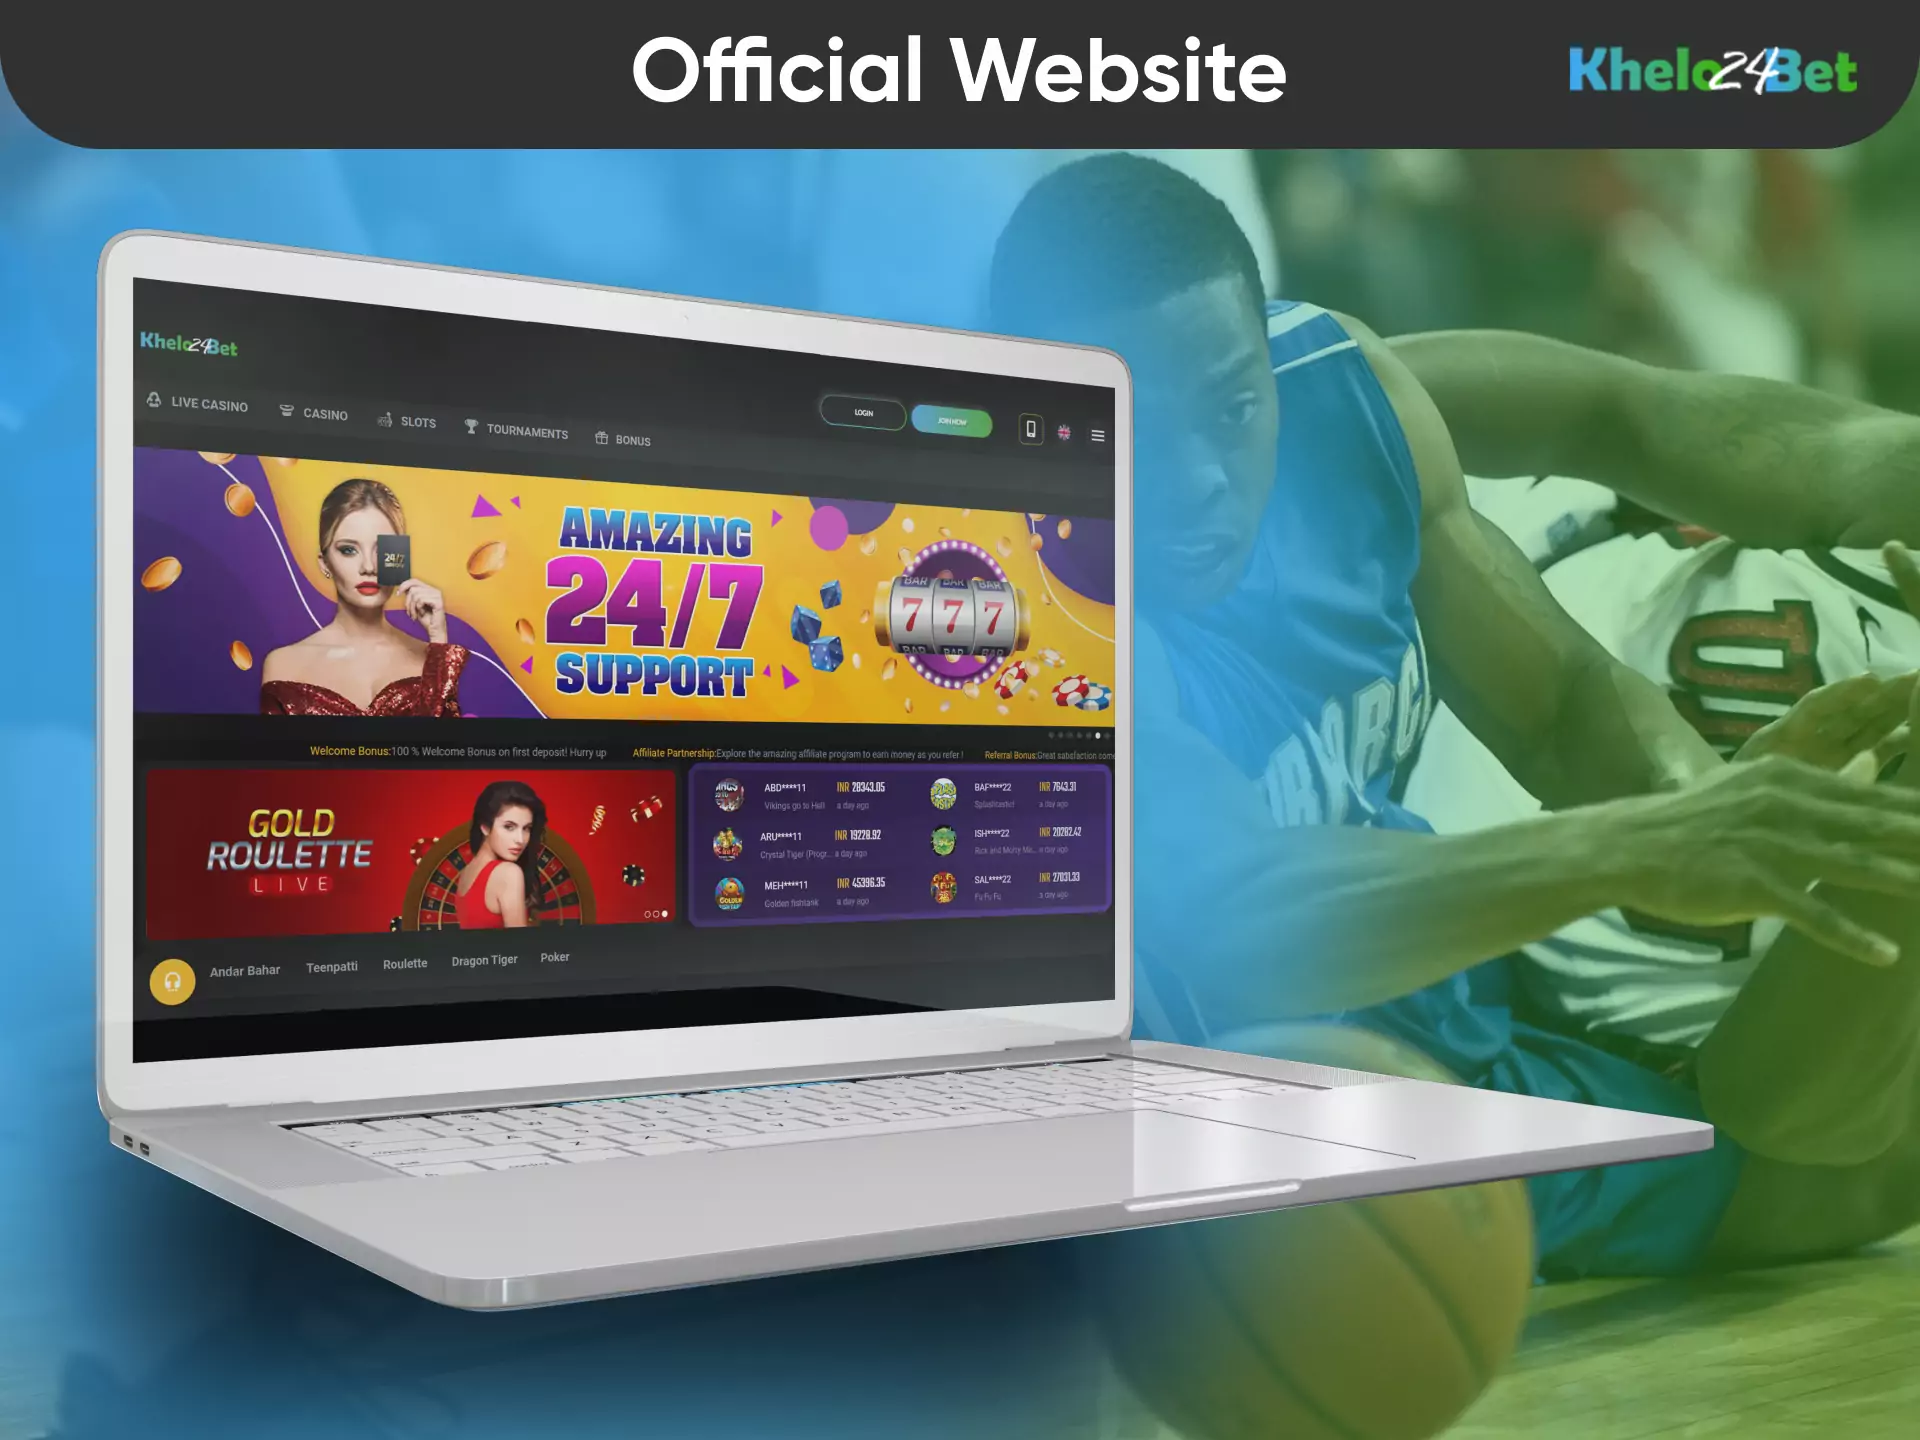 The Khelo24bet website works great on any modern device.